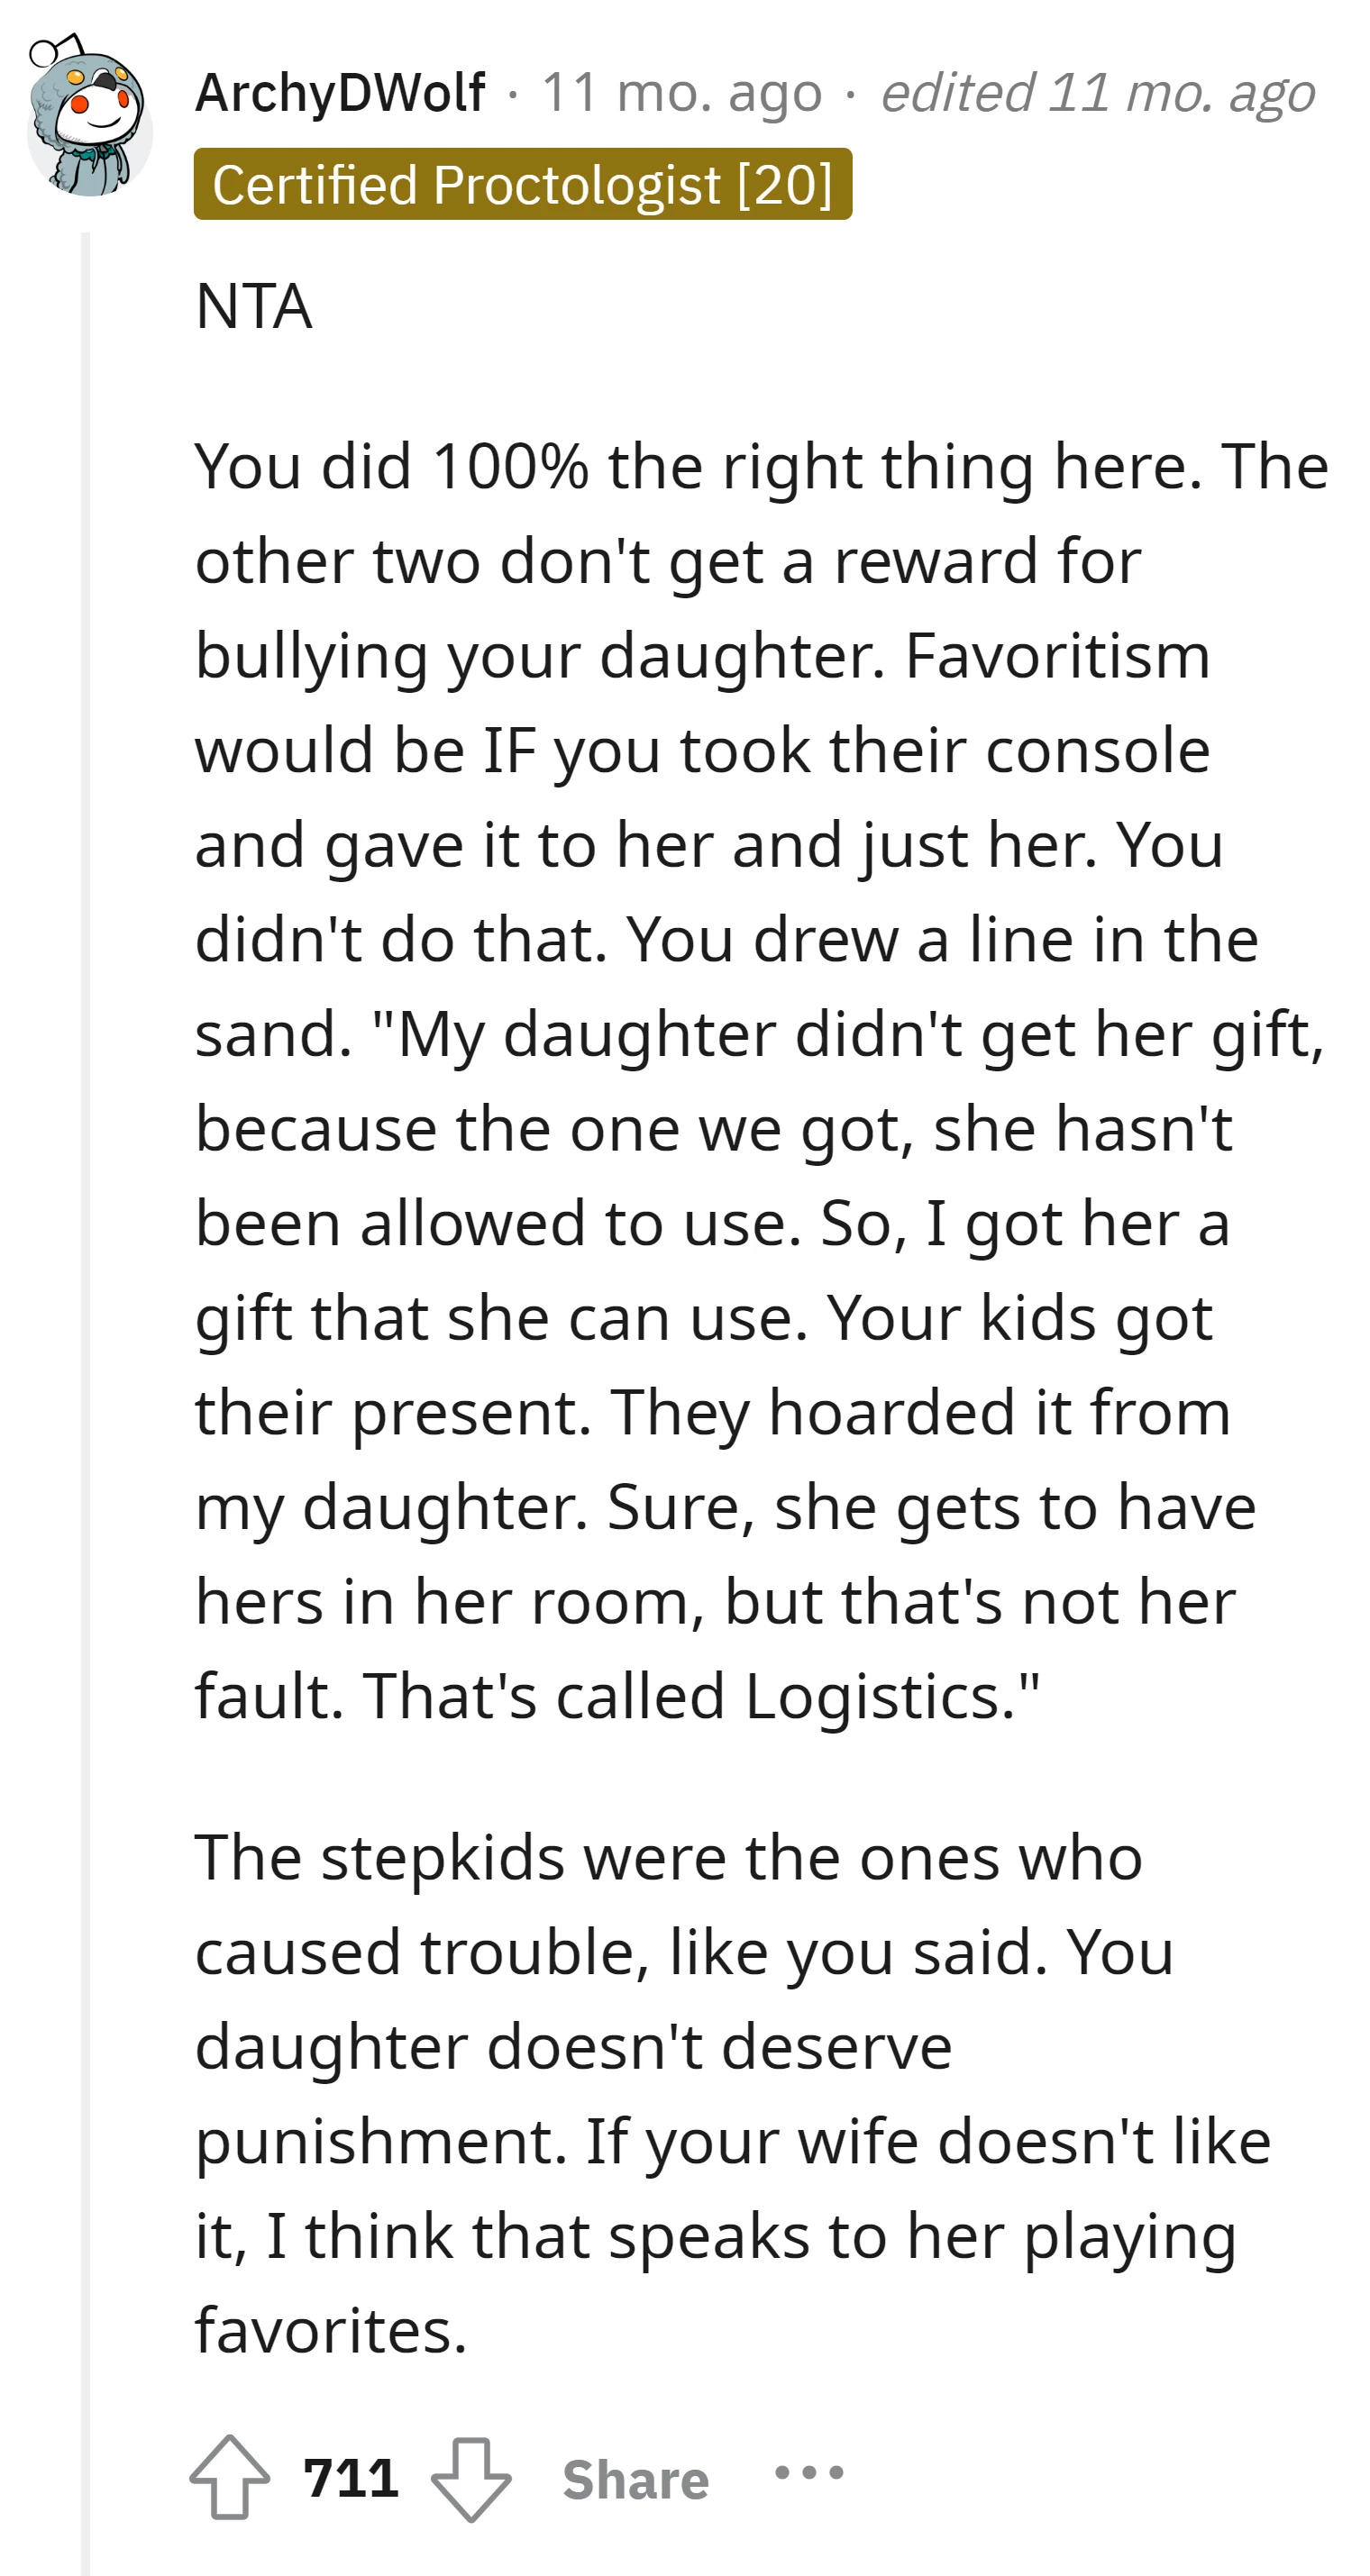 It's not favoritism but a fair response to the stepkids' bullying behavior